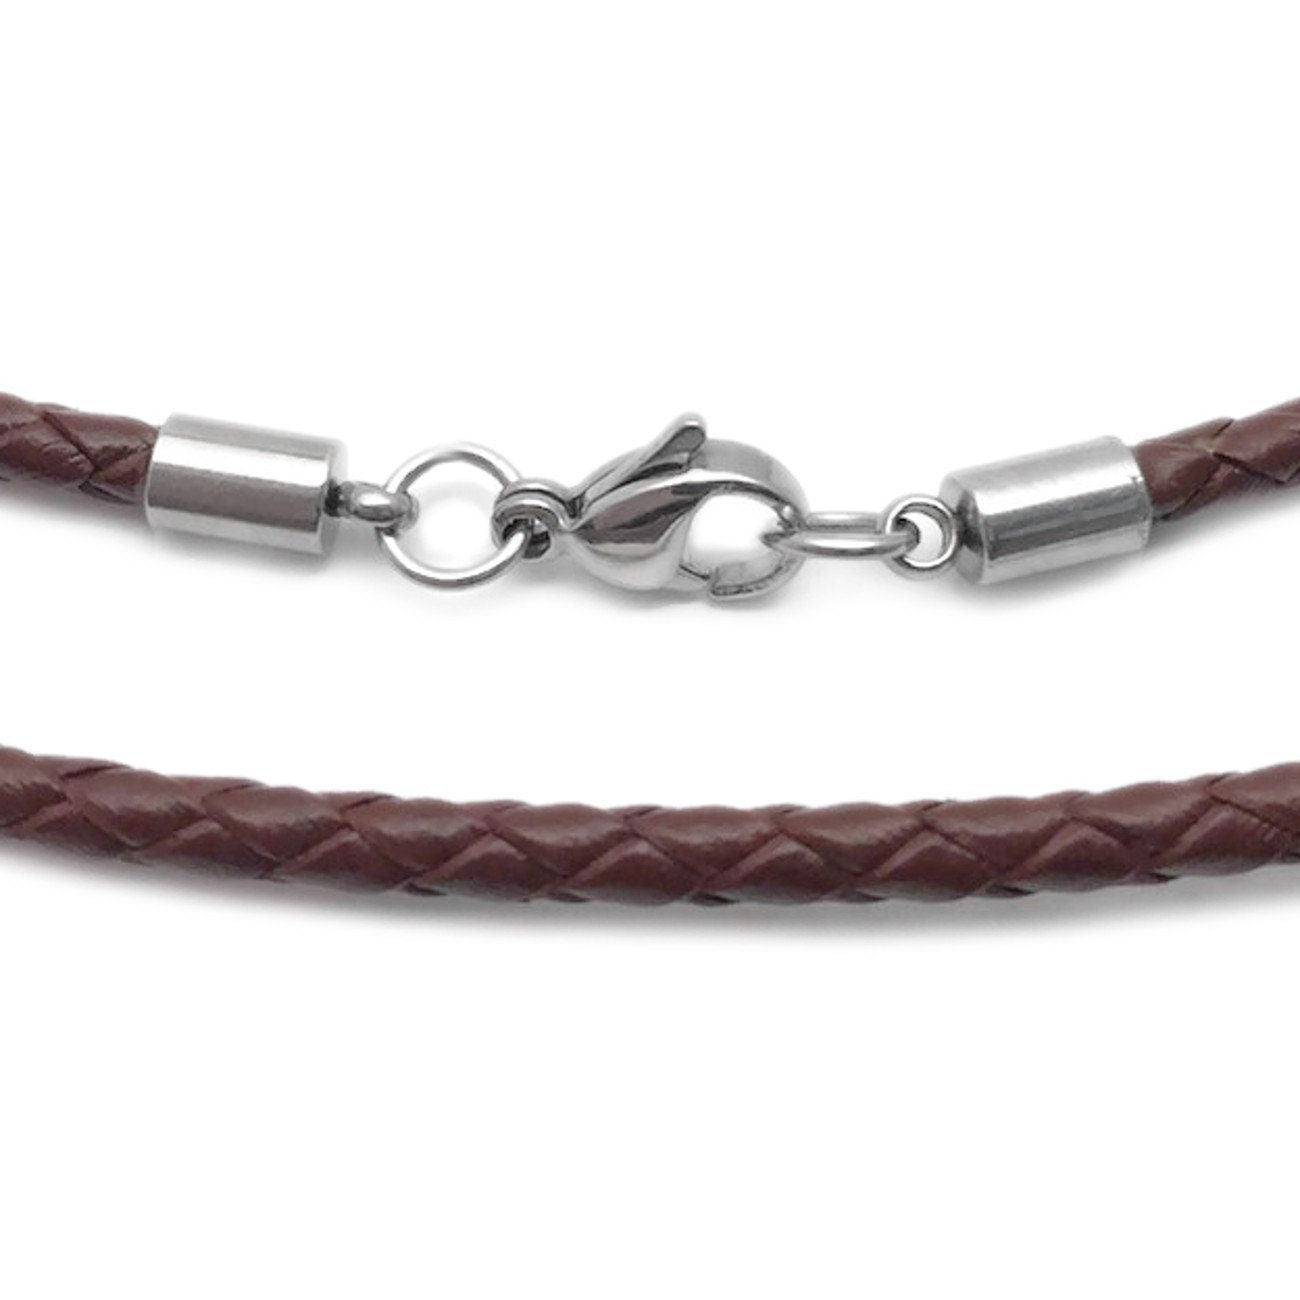 Brown Braided Leather Cord, 3mm, Mens Leather Necklace, Gift for Cowboy, Womens Jewelry, Stainless Steel Lobster Clasp